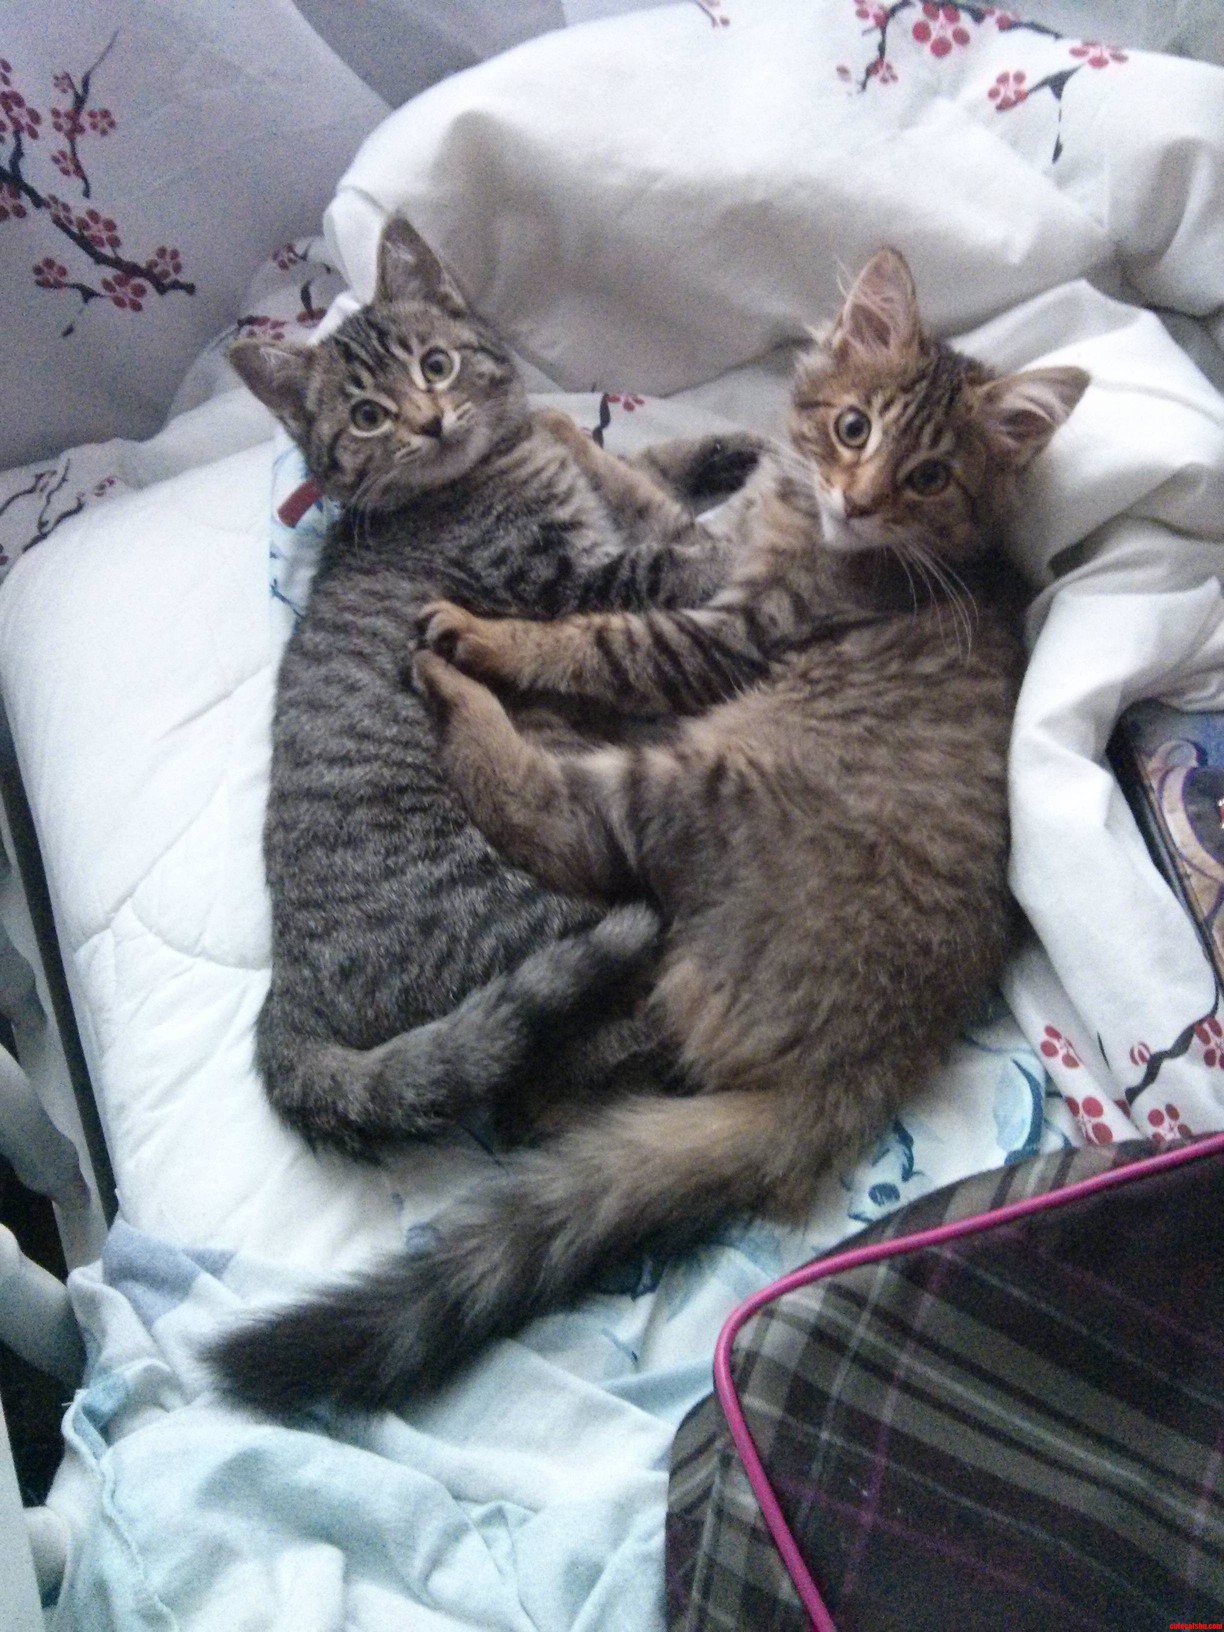 I Was Previously Opposed To Cats. Then My Sister Got Two Kittens… They Just Hit 10 Weeks.